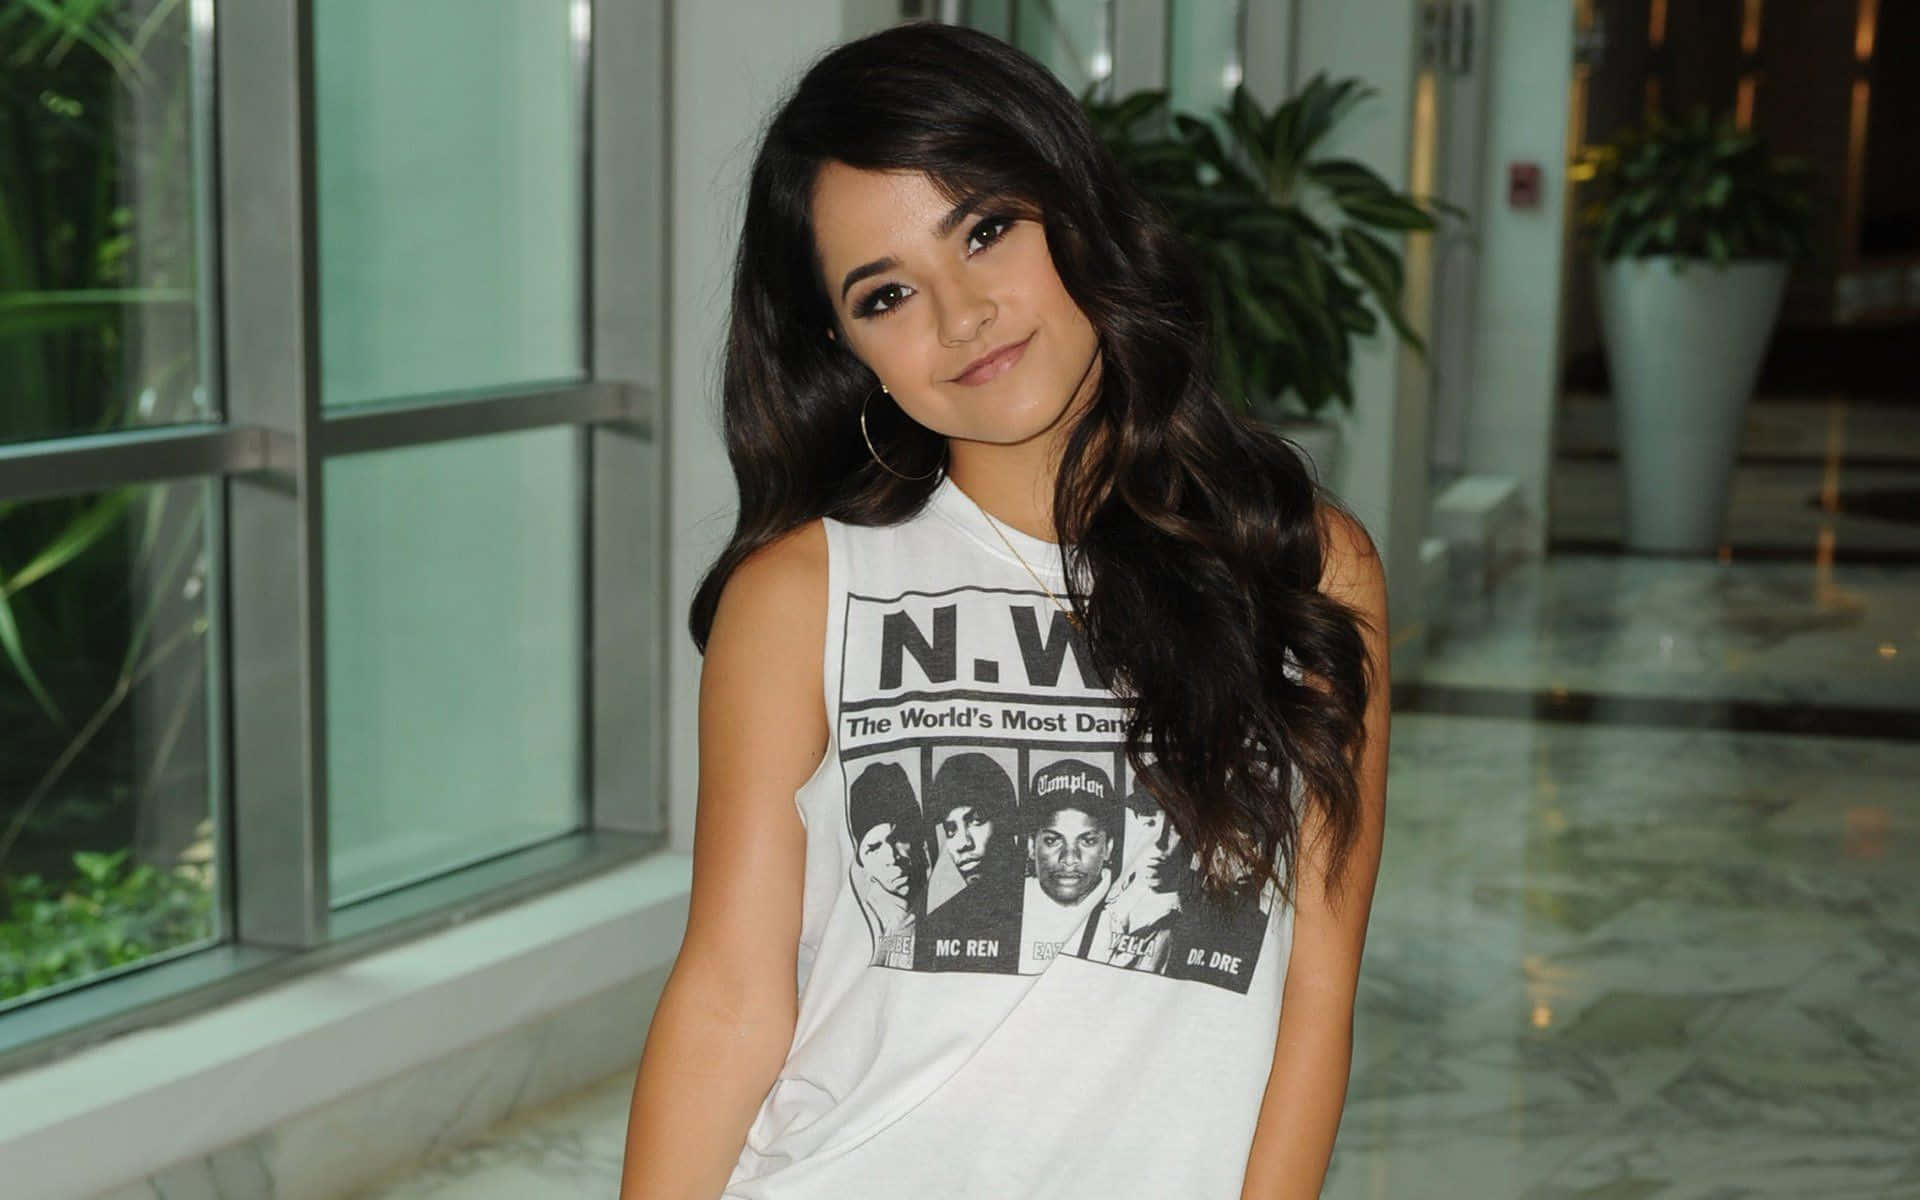 Showing her independent spirit: Becky G, here!